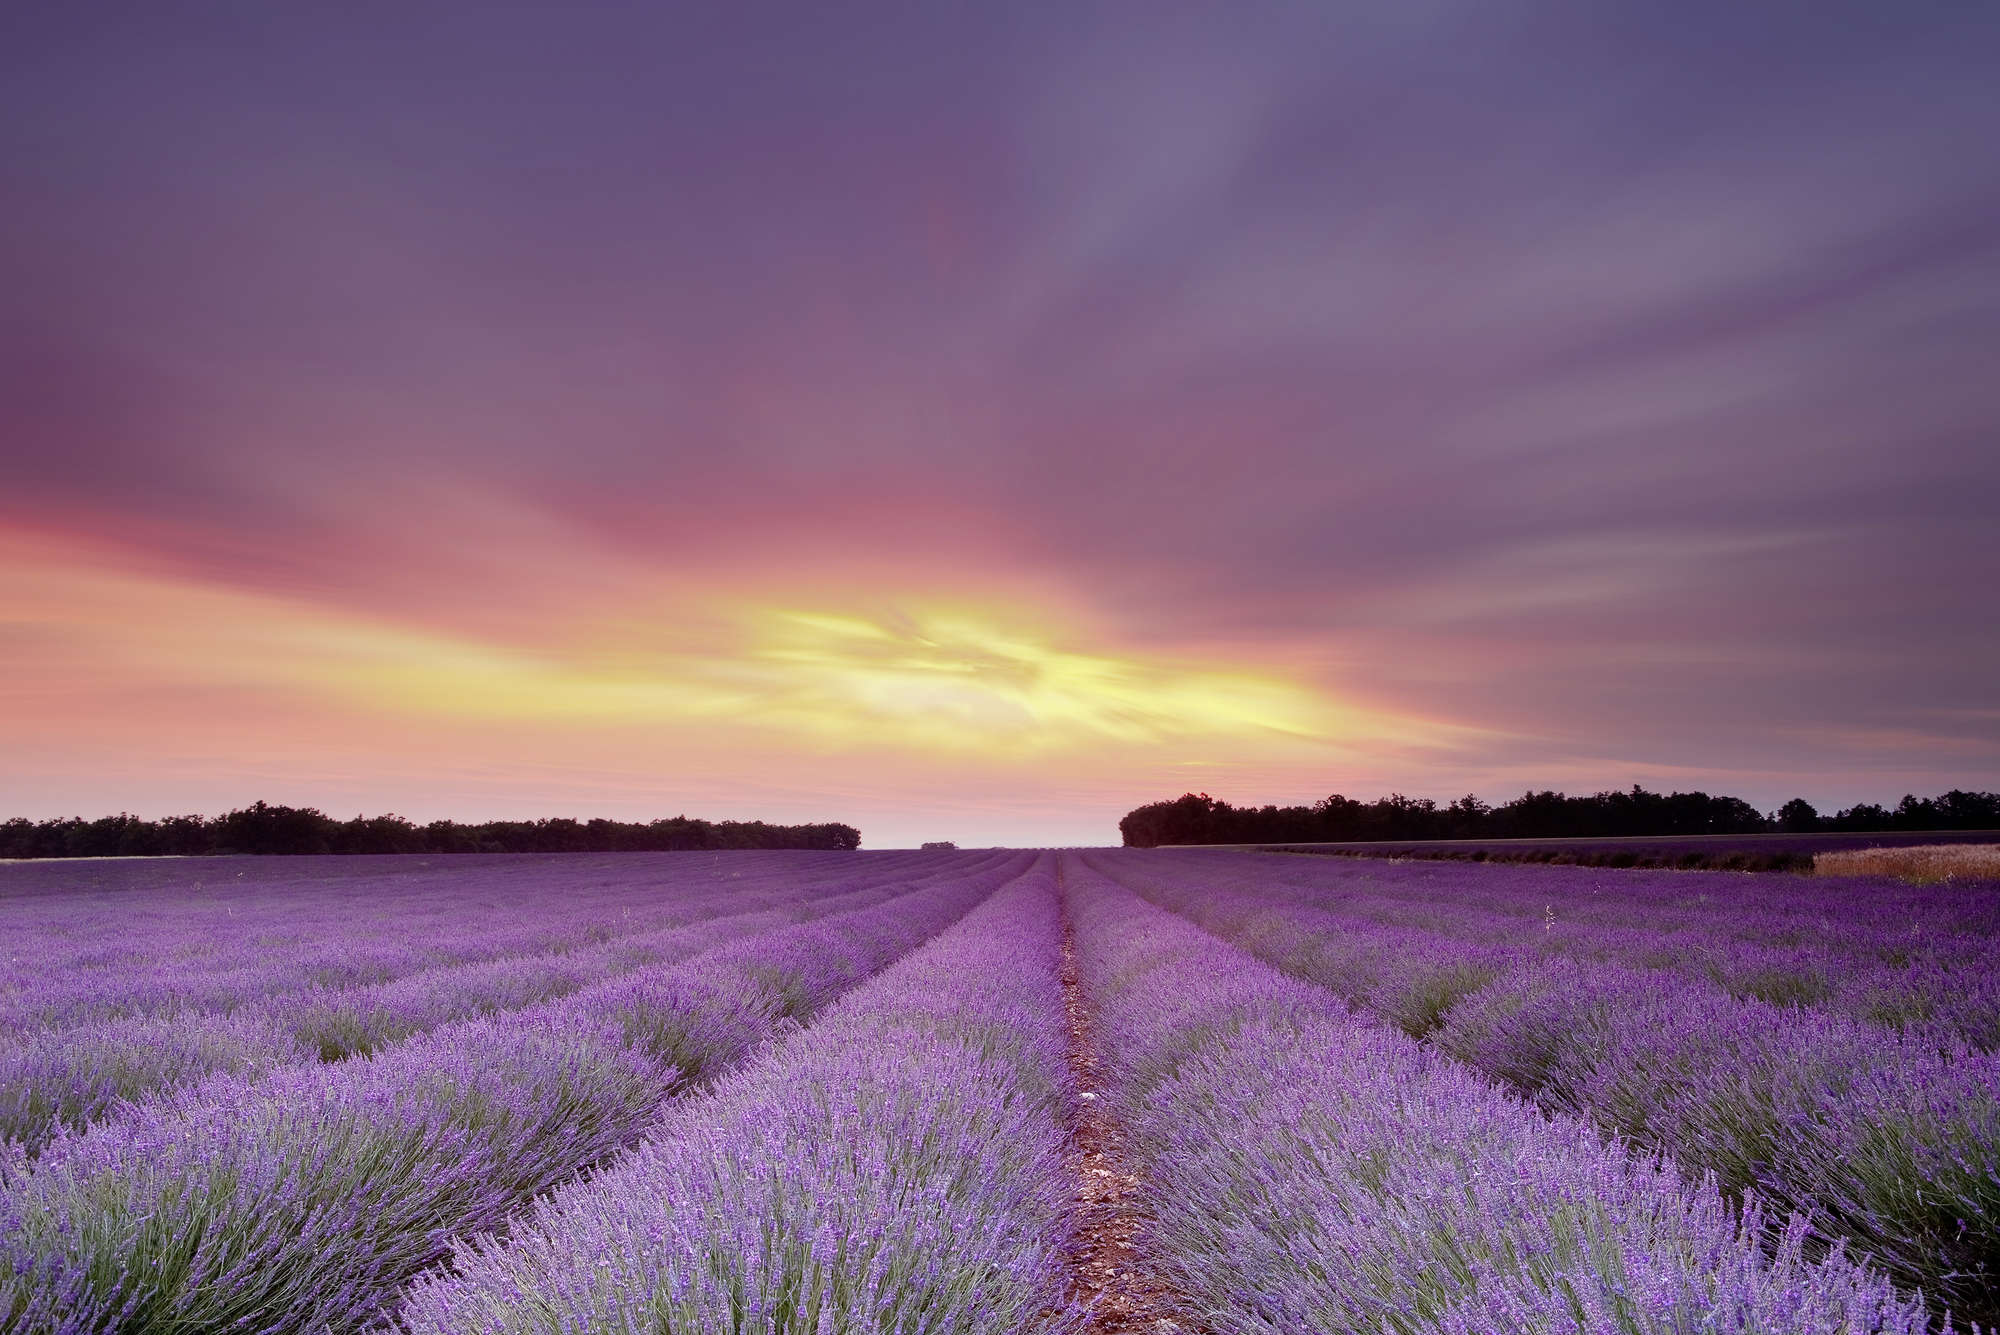             Nature Wallpaper Lavender Field in Sunset - Textured Non-woven
        